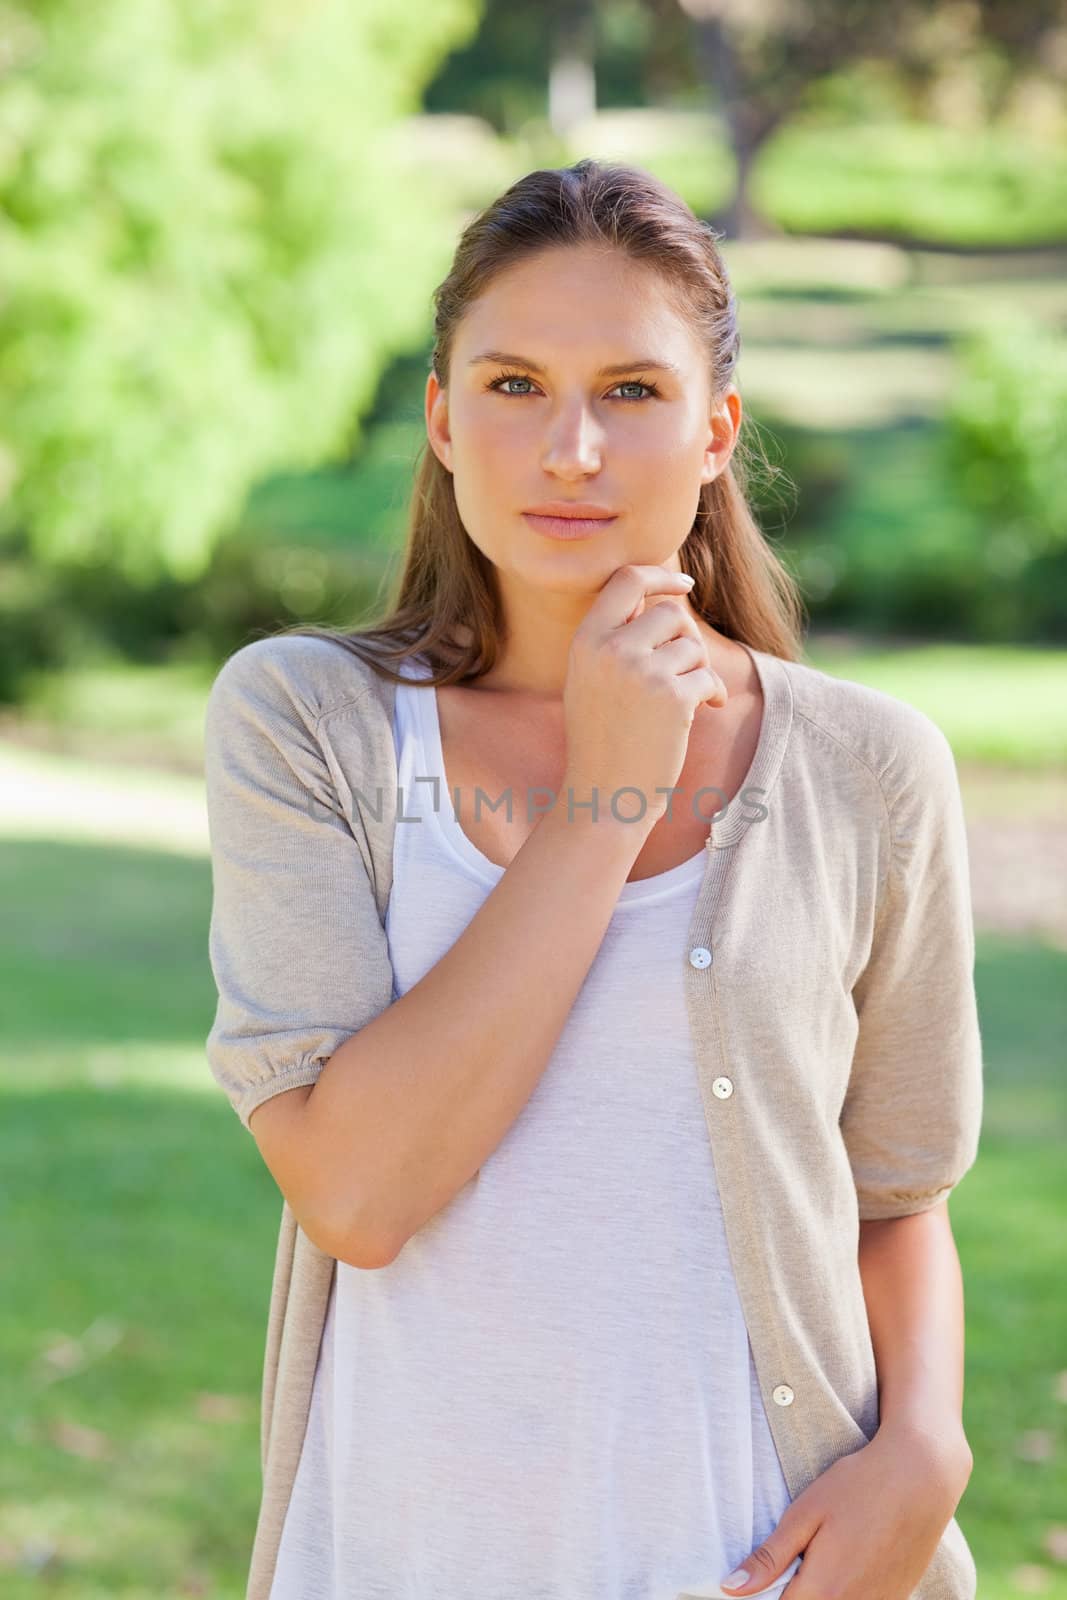 Thoughtful woman standing in the park by Wavebreakmedia